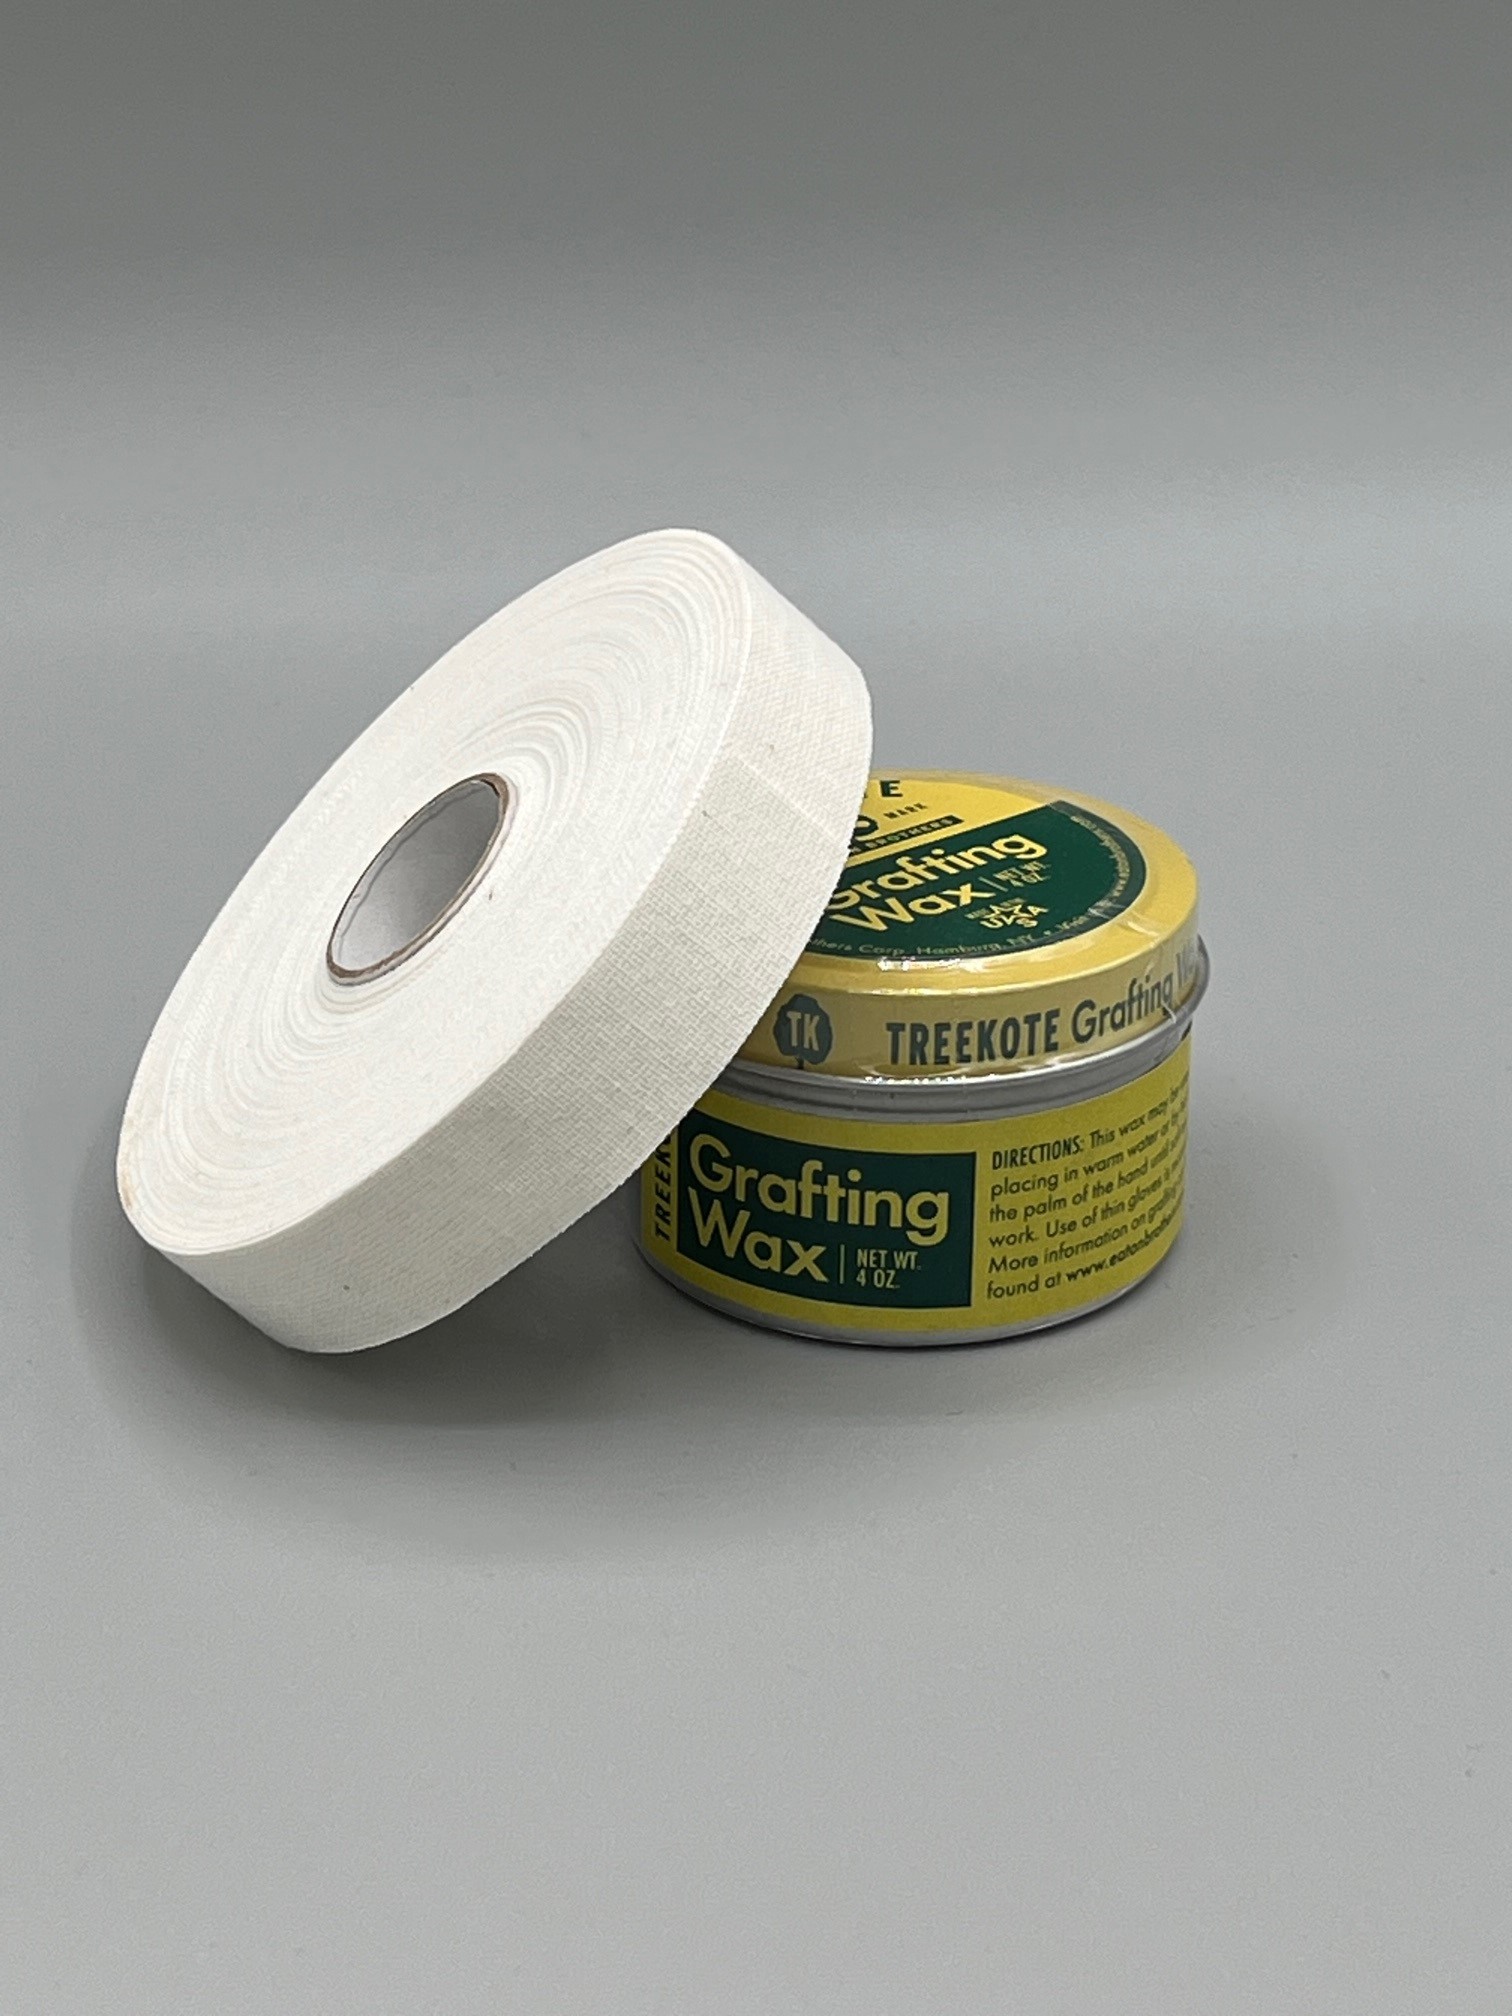 Cloth Grafting Tape, Tree and Plant Grafting Tape